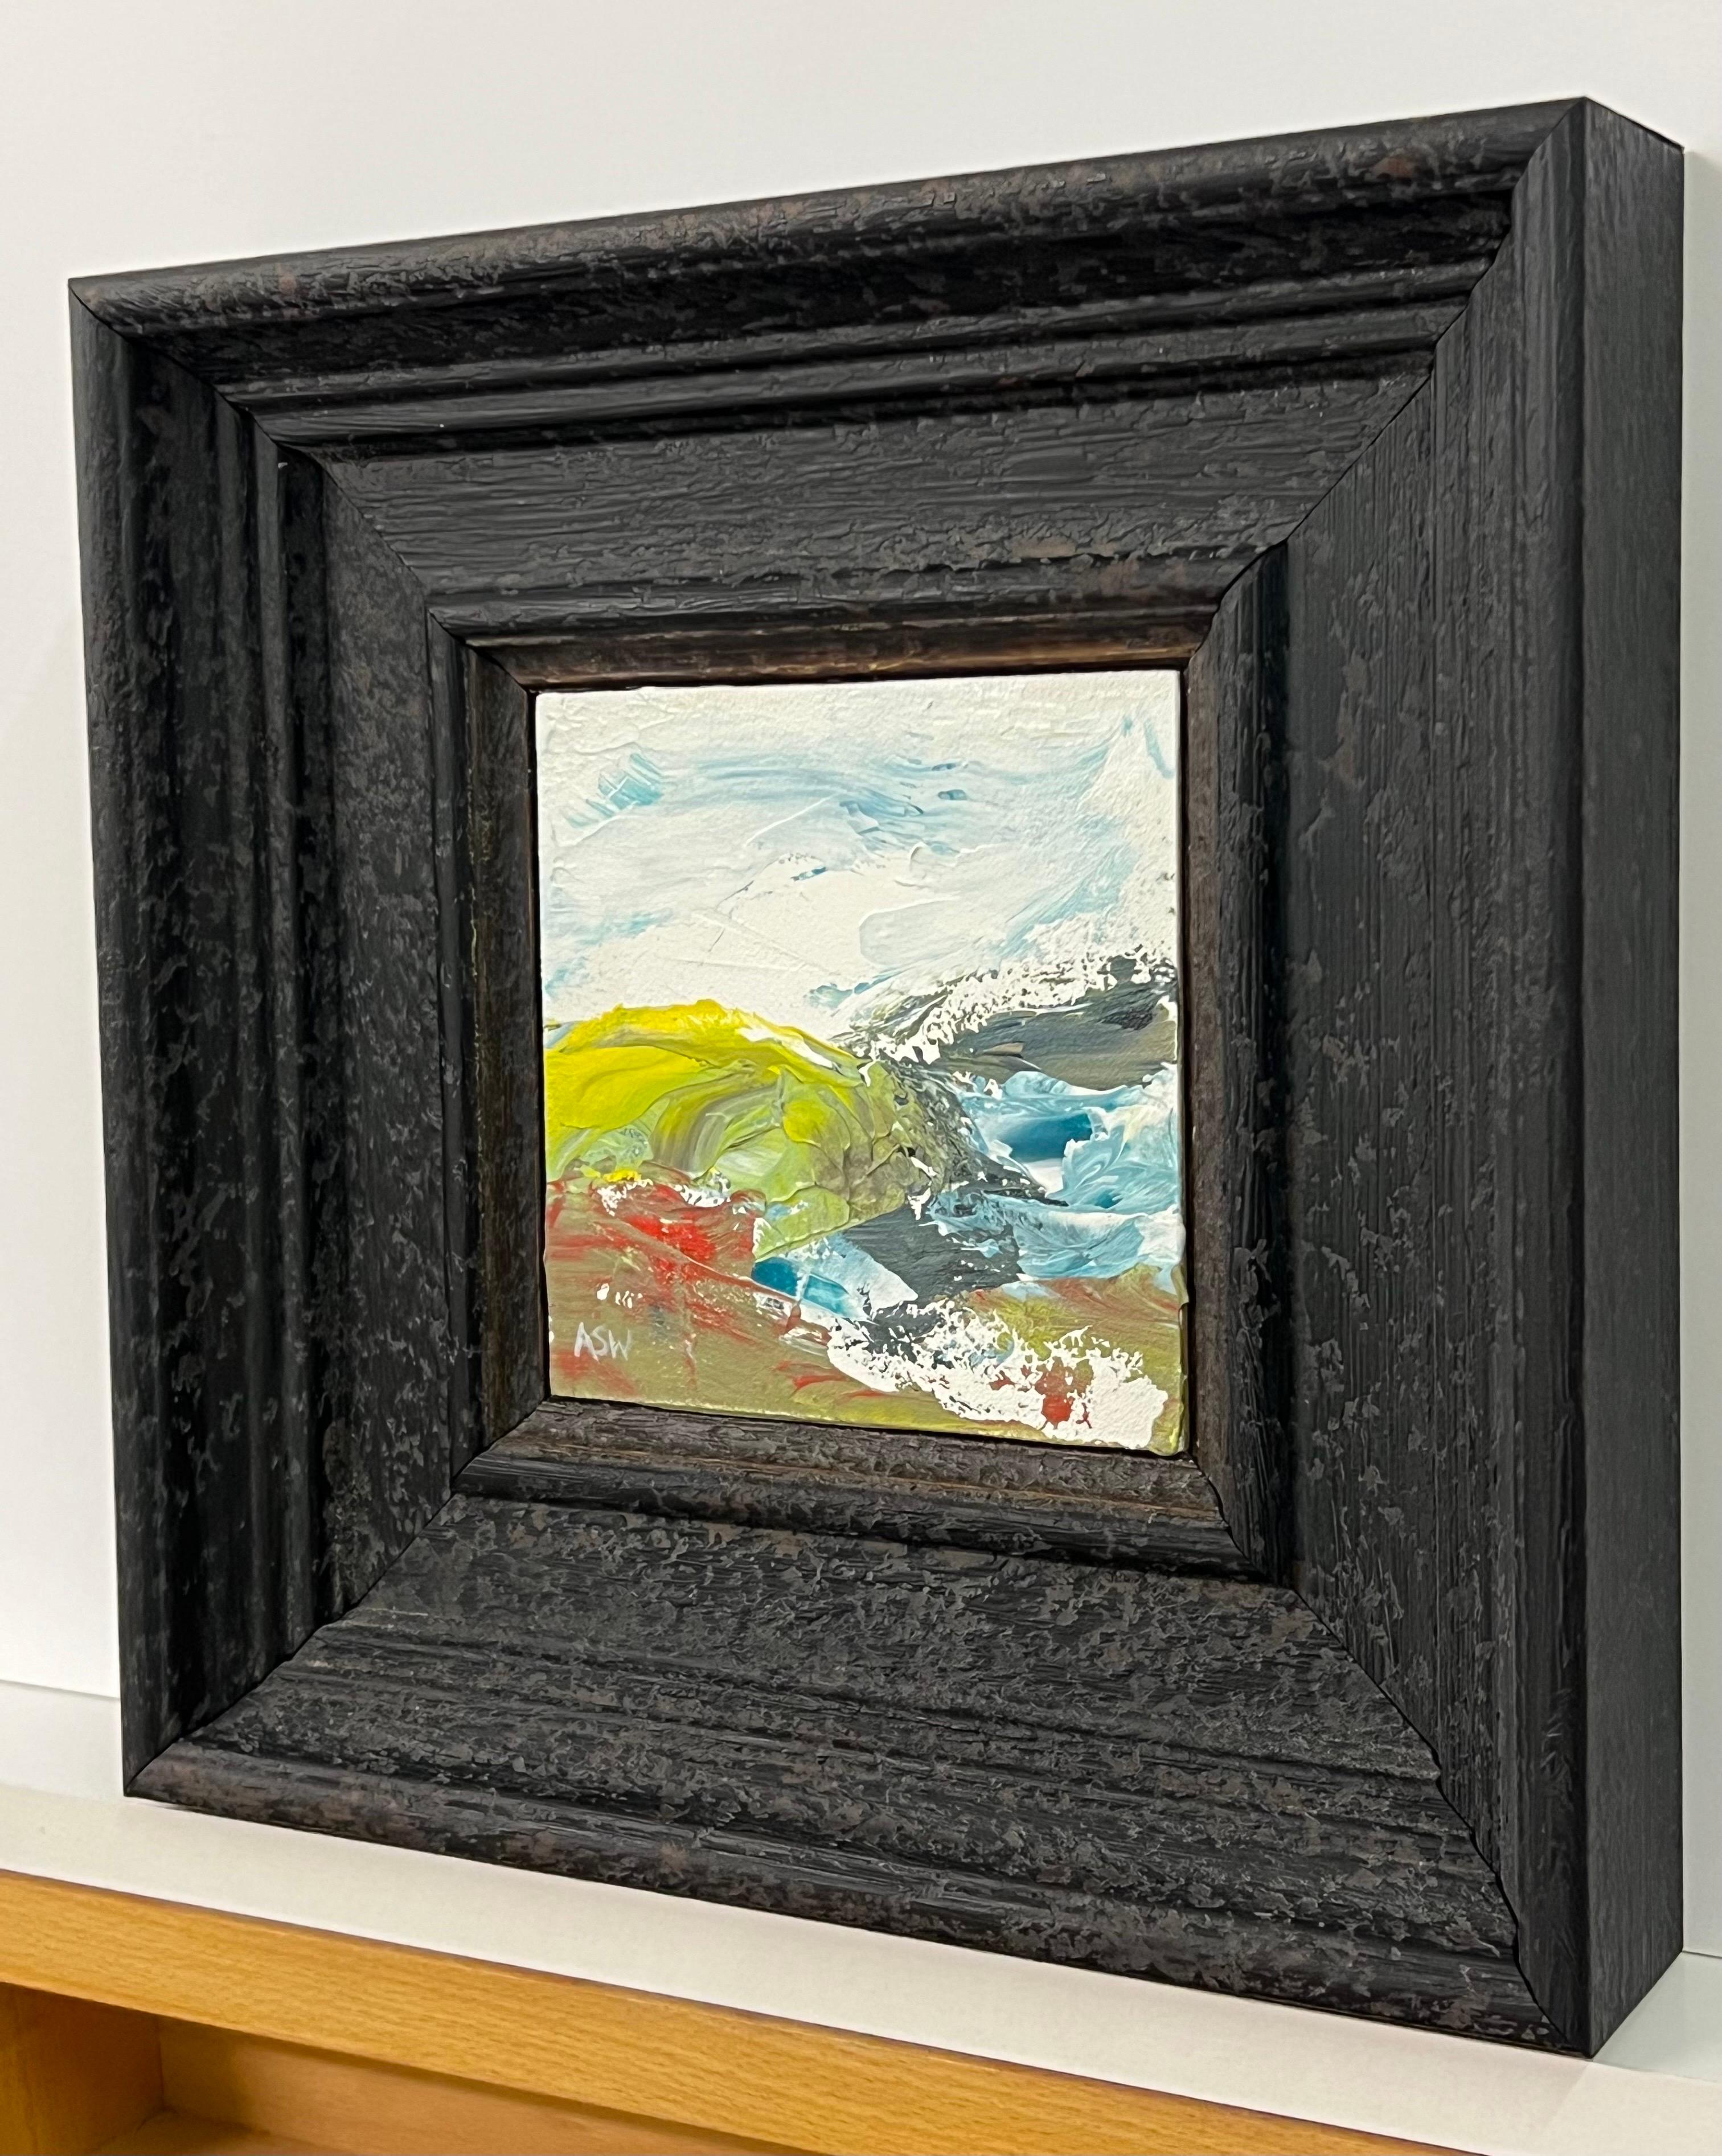 Impasto Abstract Seascape Landscape Miniature Study by Contemporary British Artist Angela Wakefield

Art measures 5 x 5 inches
Frame measures 11 x 11 inches 

Framed in a high quality off-black moulding 

Angela Wakefield has twice been on the front